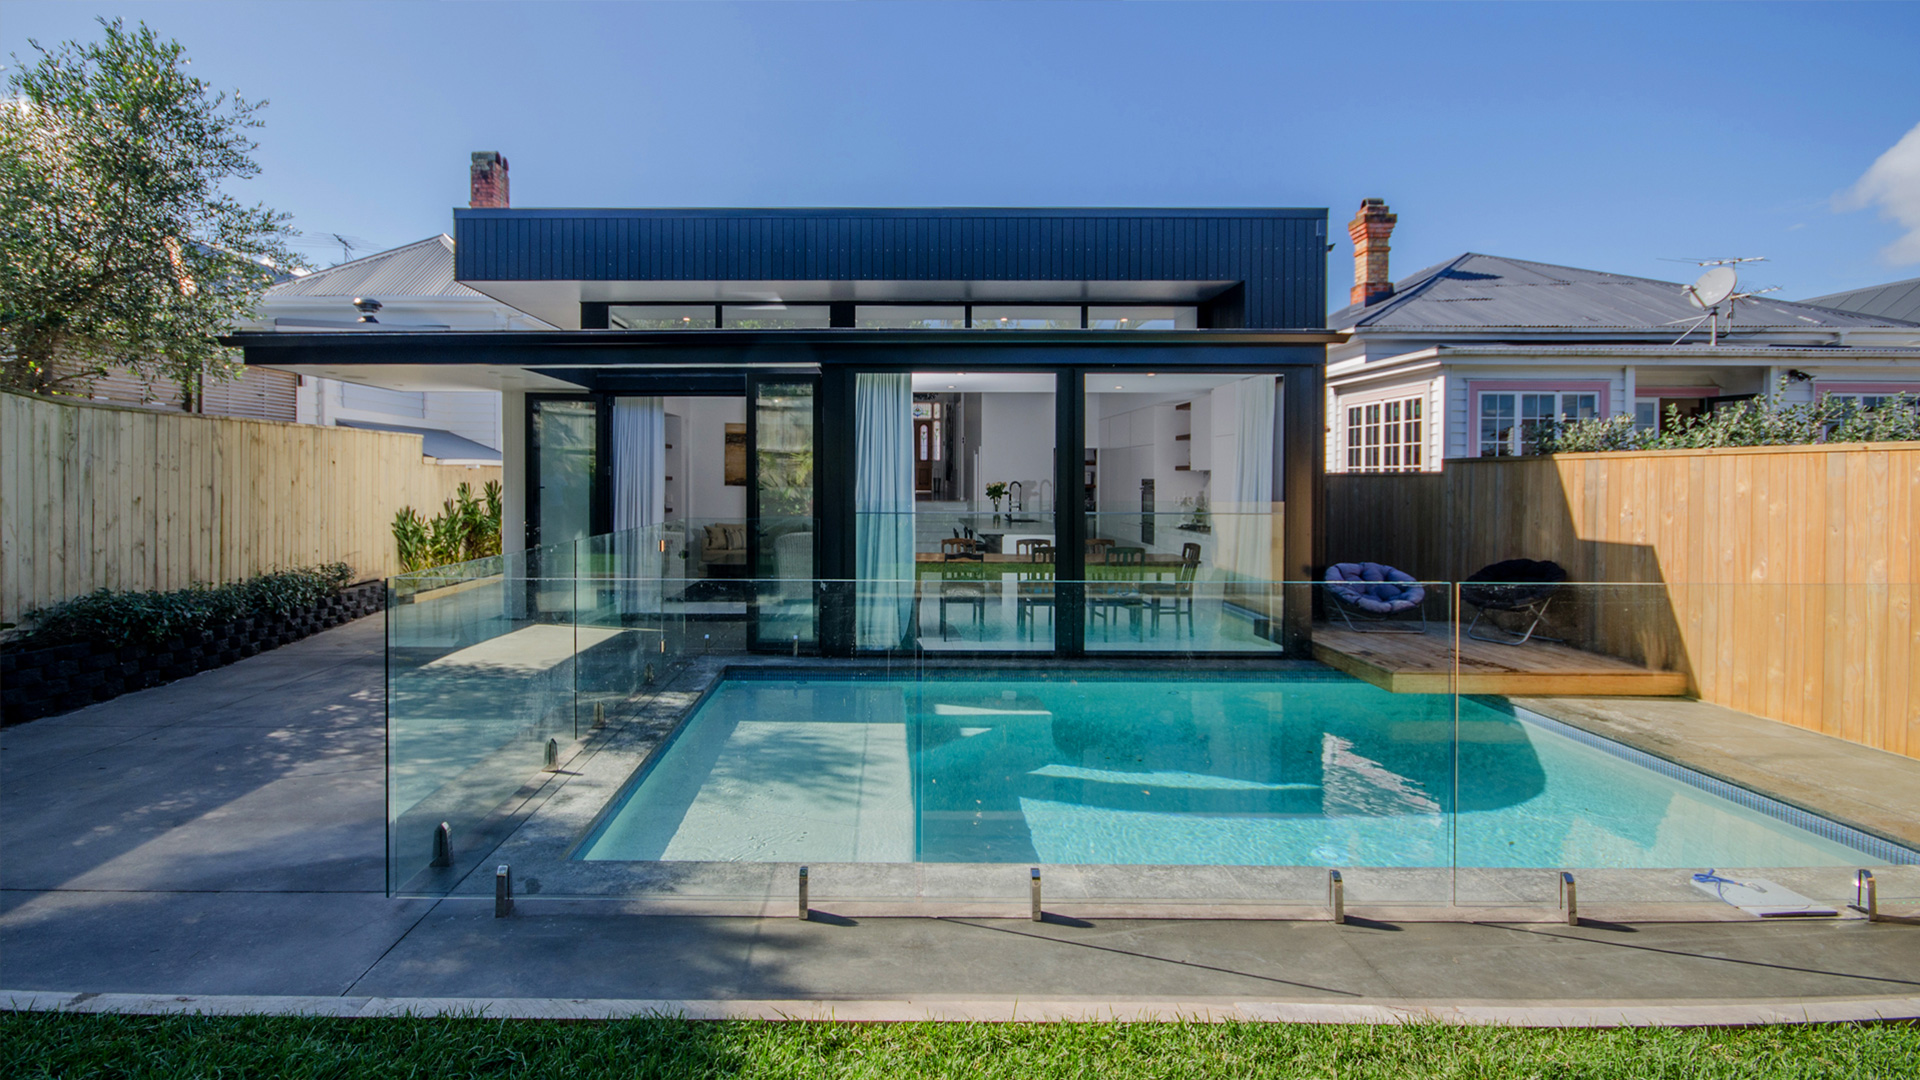 Herne Bay House designed by Matz Architects